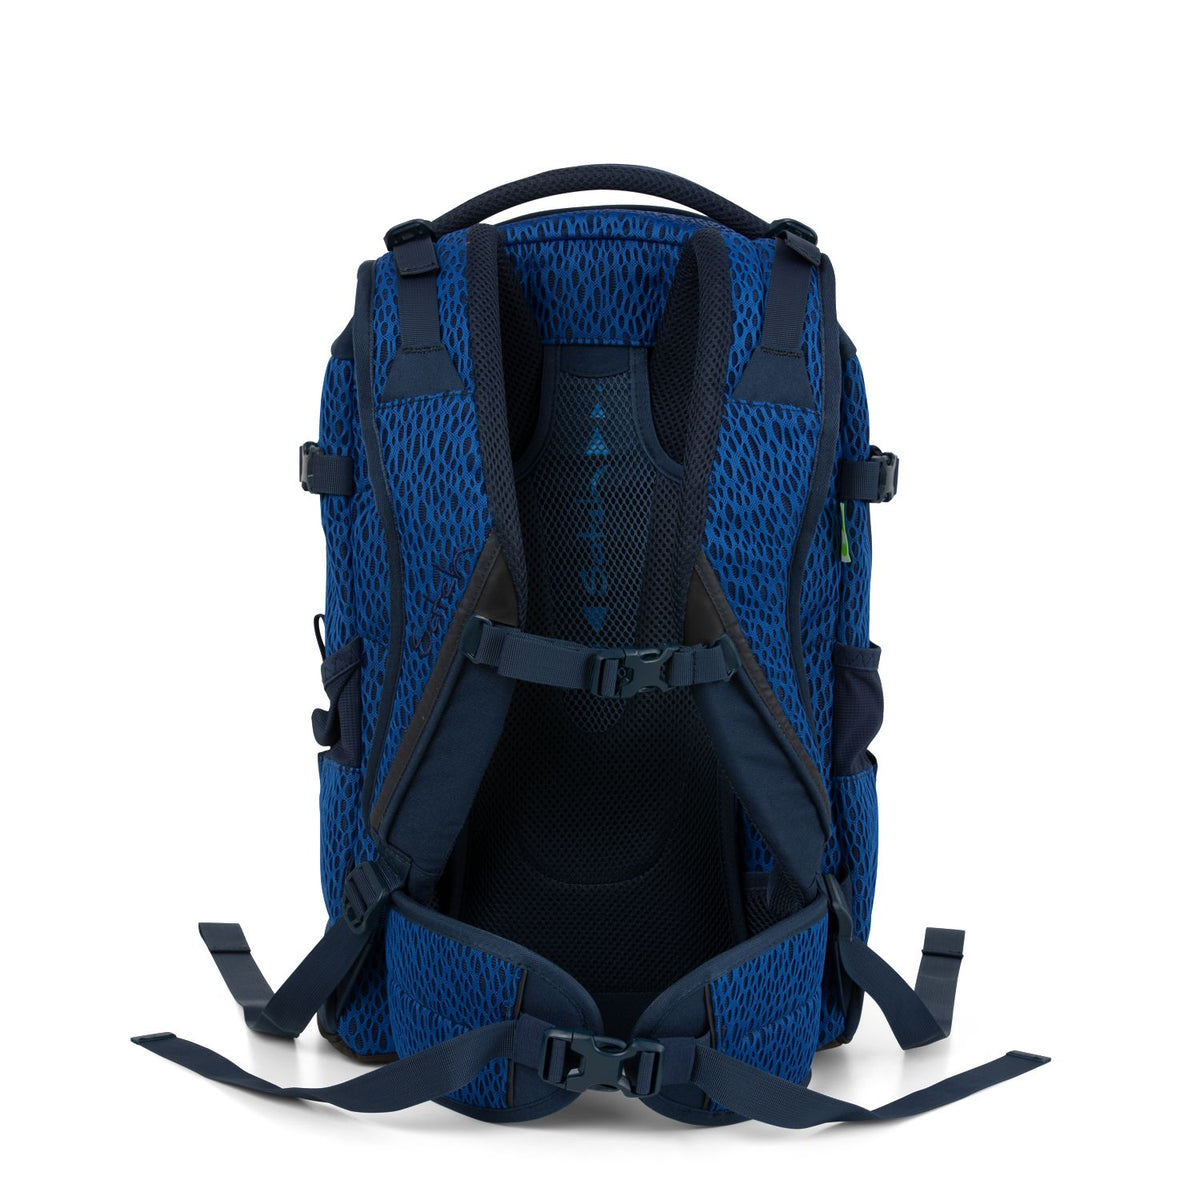 Satch Pack Ergonomic School Backpack for Teenagers